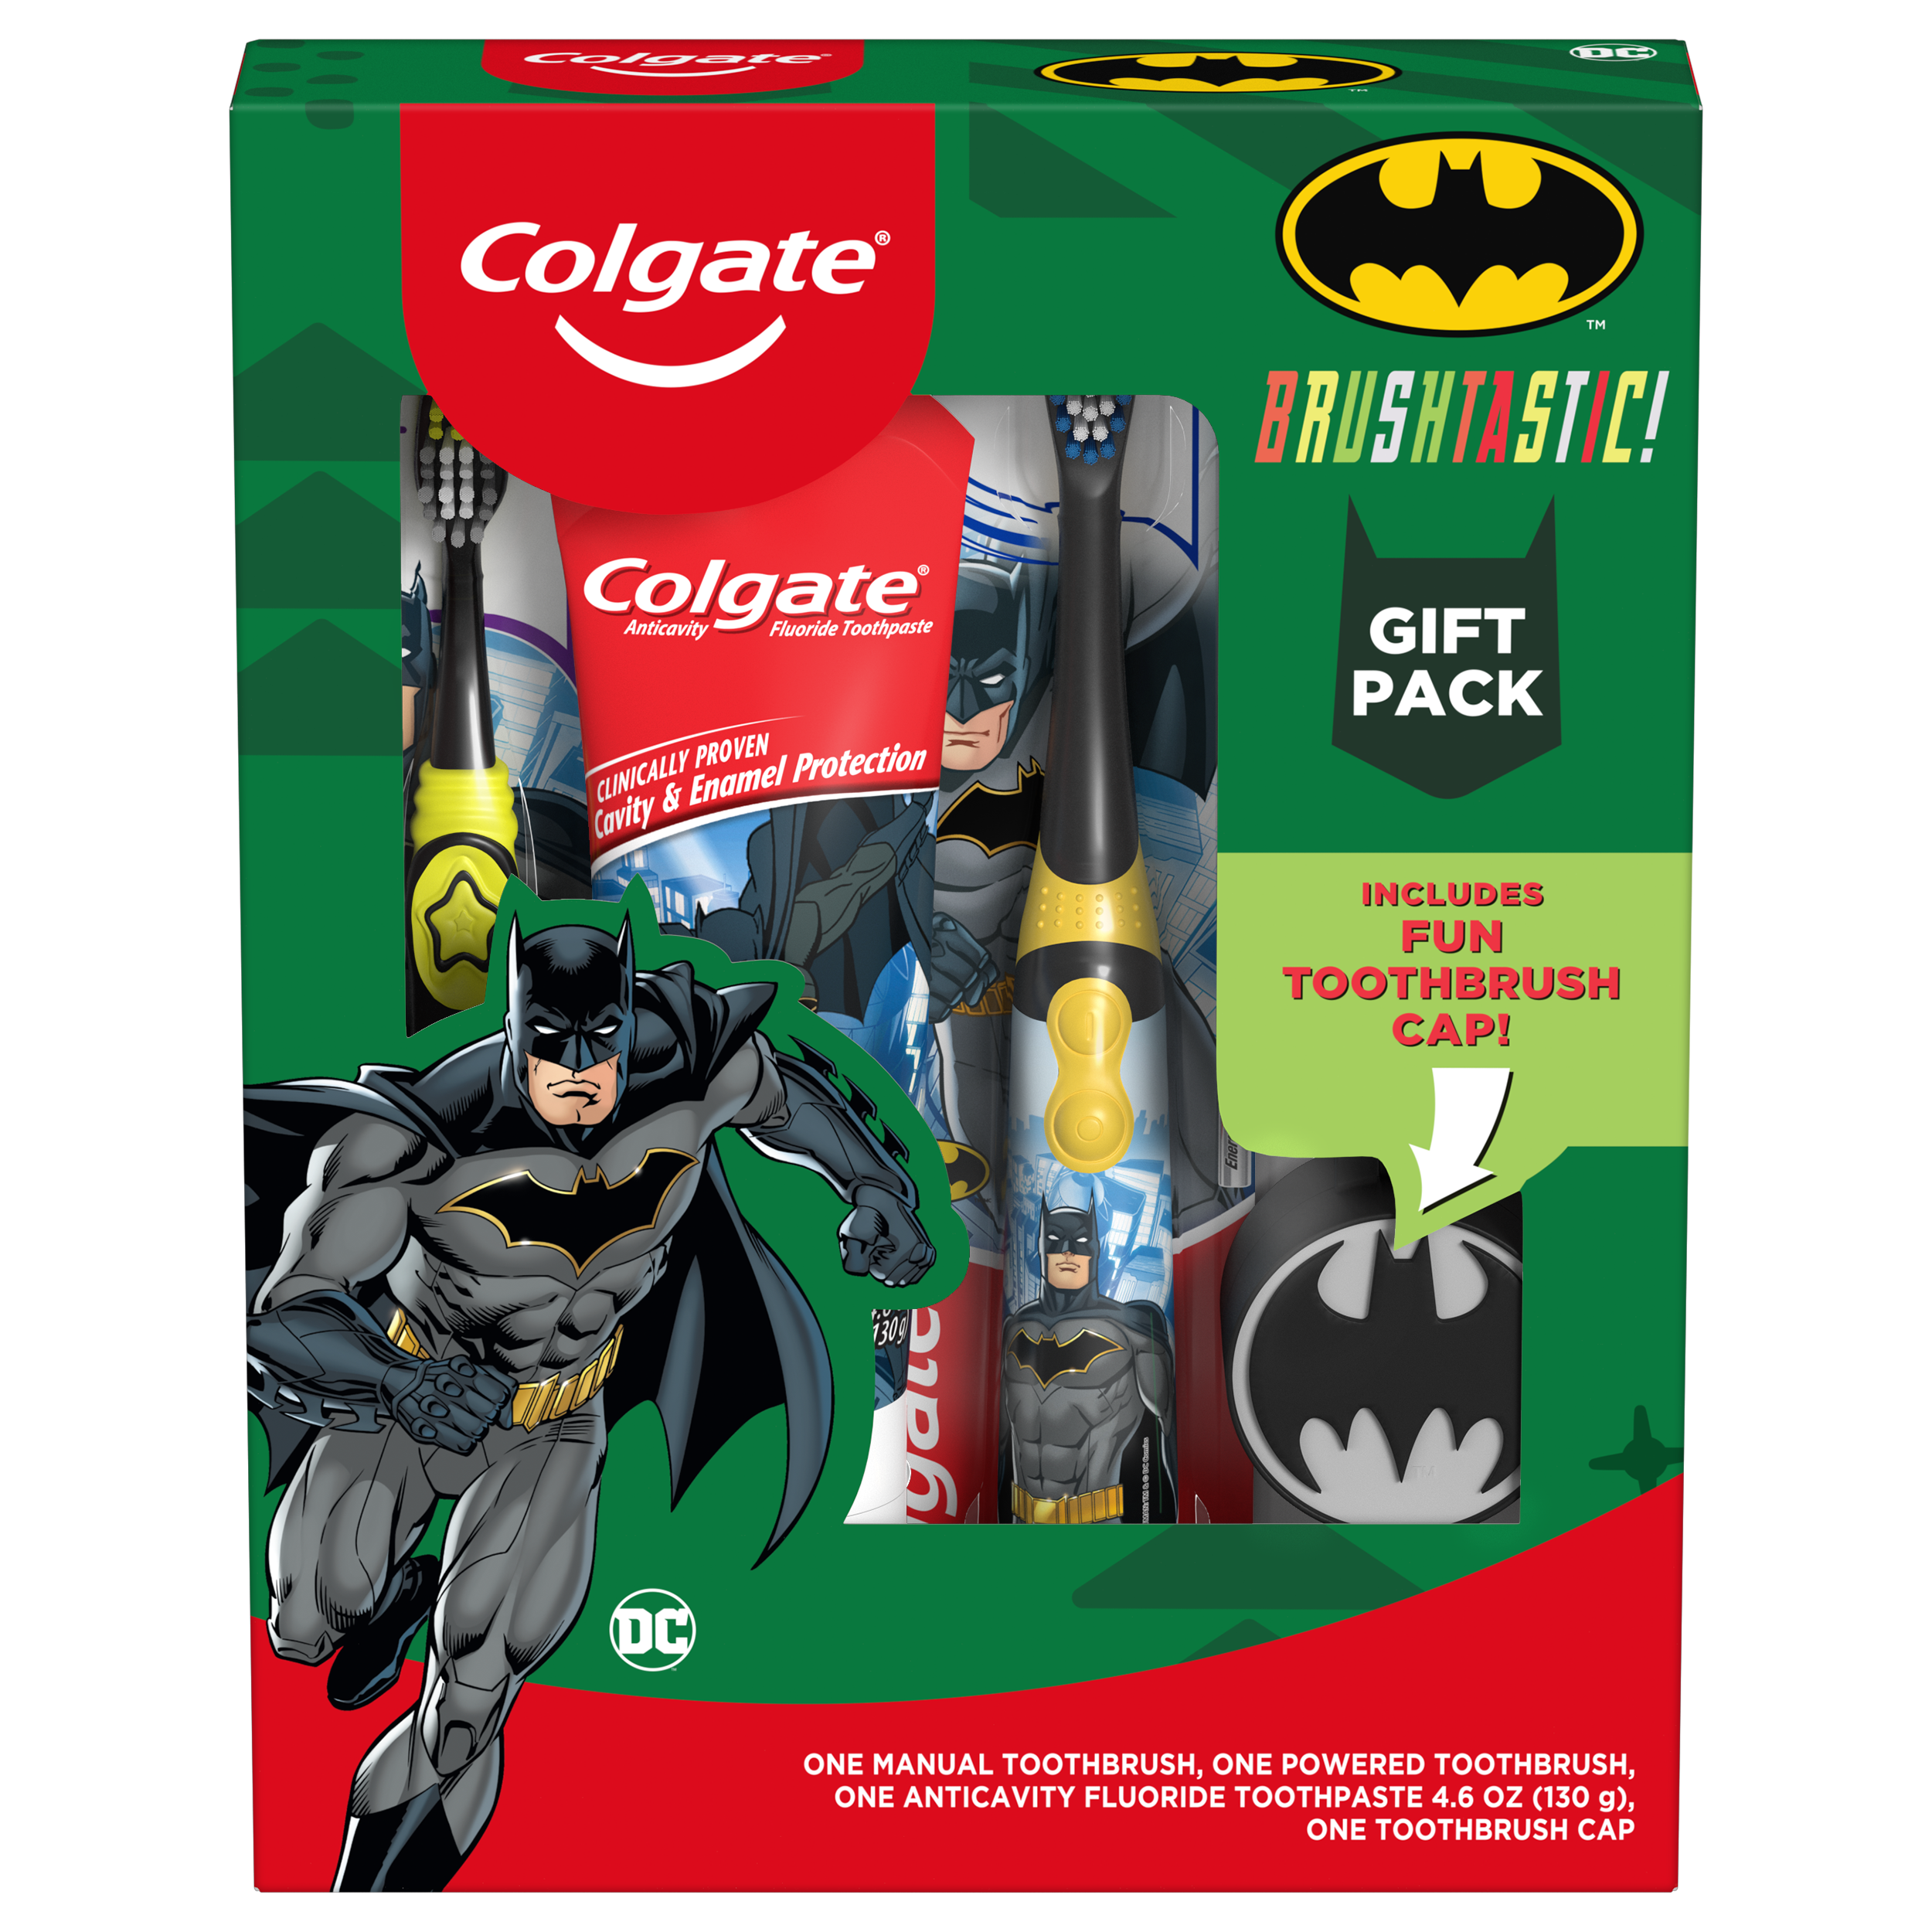 Colgate Kids Toothpaste, Manual and Battery Kids Toothbrushes with Toothbrush Cover Gift Set, Batman, 4 Pc - image 3 of 5